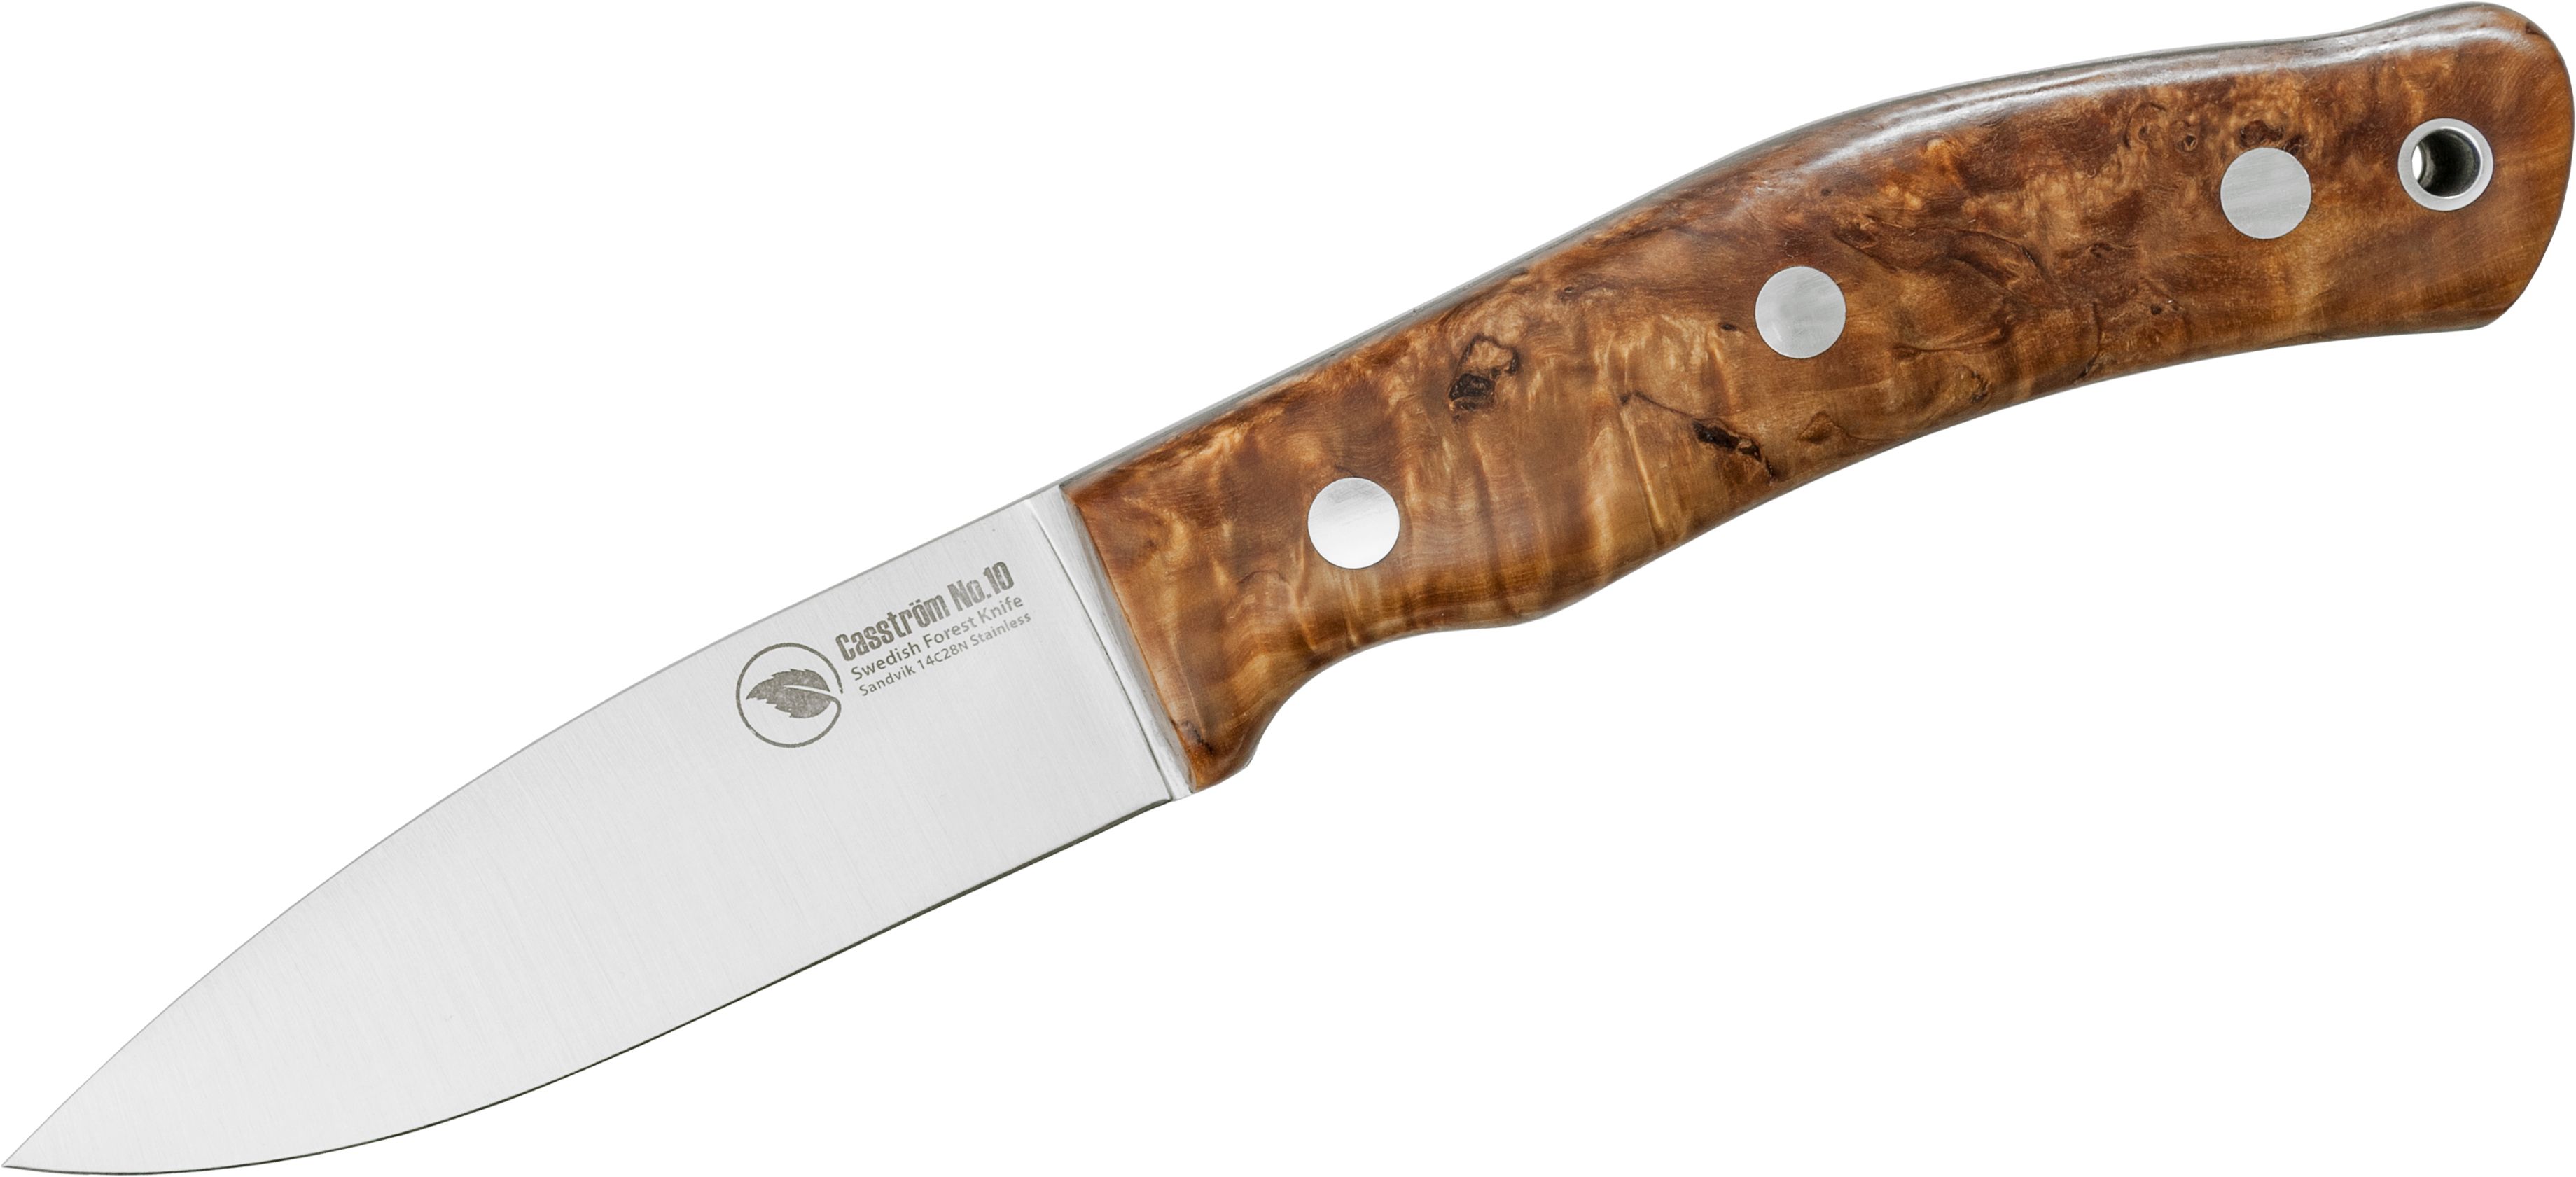 Casstrom No.10 Swedish Forest Knife with Firesteel Combo (Oiled Curly Birch - 14C28N Stainless Steel)